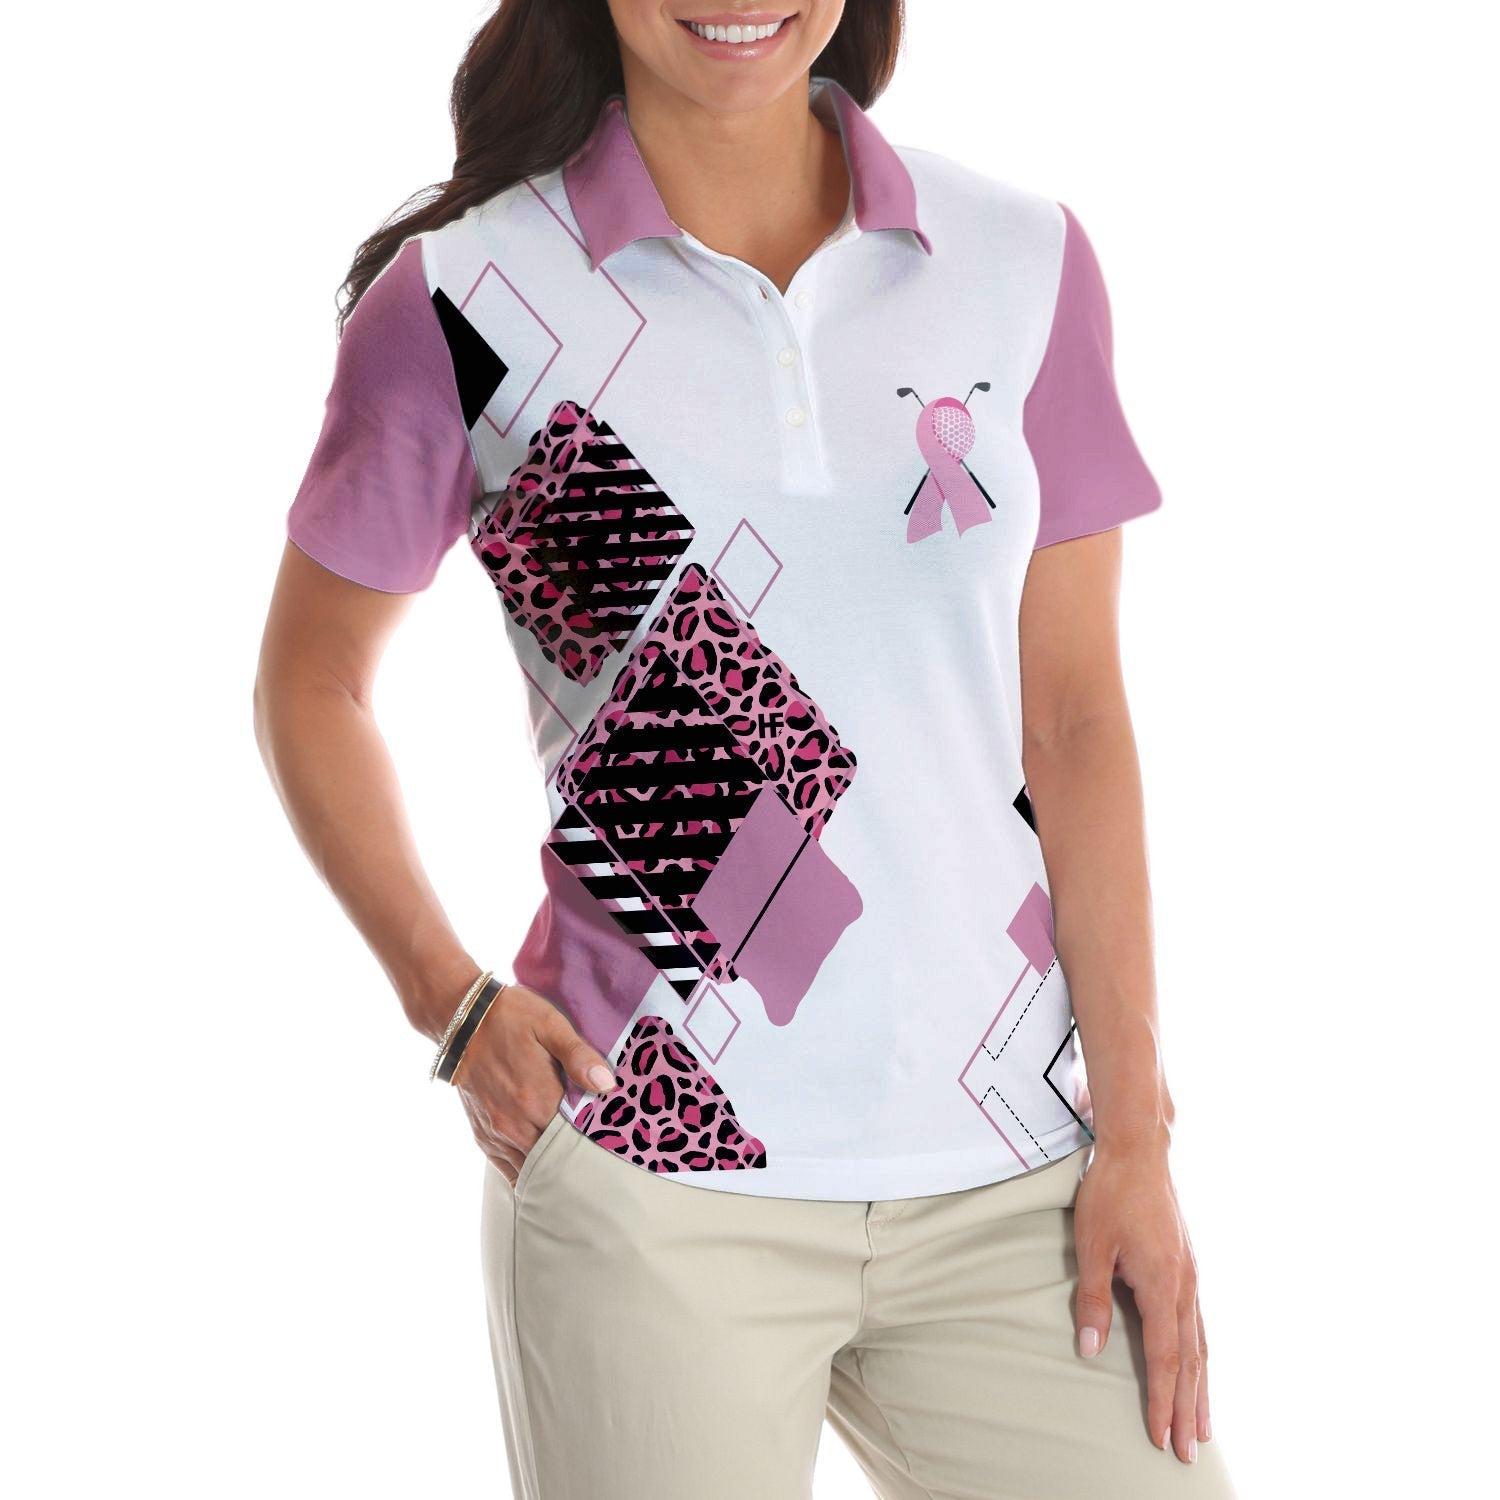 Golf Girl In October We Wear Pink Short Sleeve Women Polo Shirt/ White And Pink Breast Cancer Awareness Shirt Coolspod